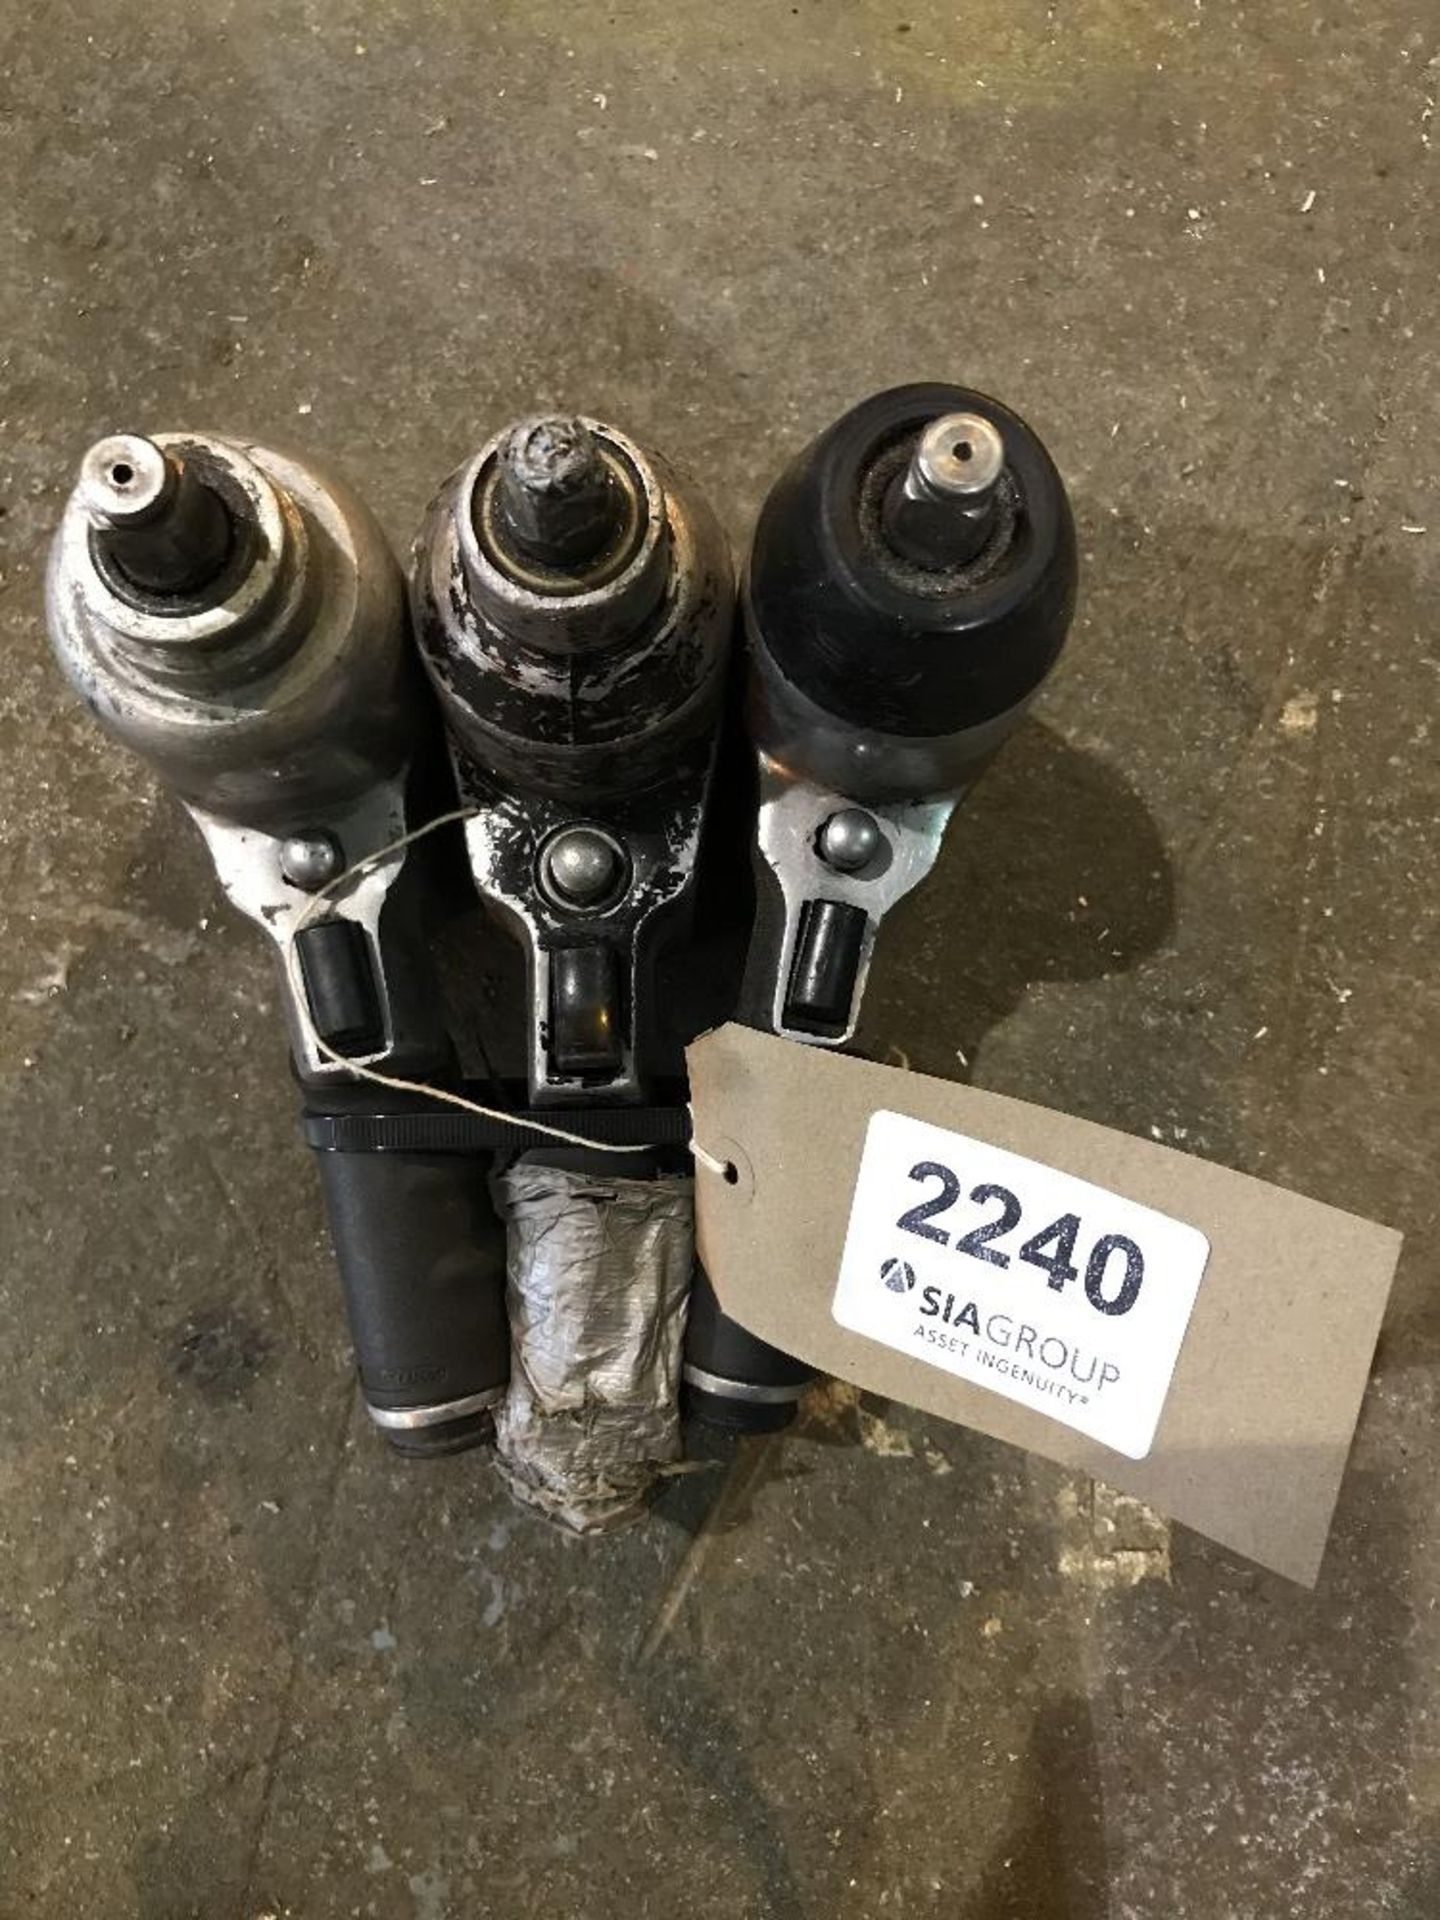 (3) Pneumatic Impact Wrenches - Unbranded